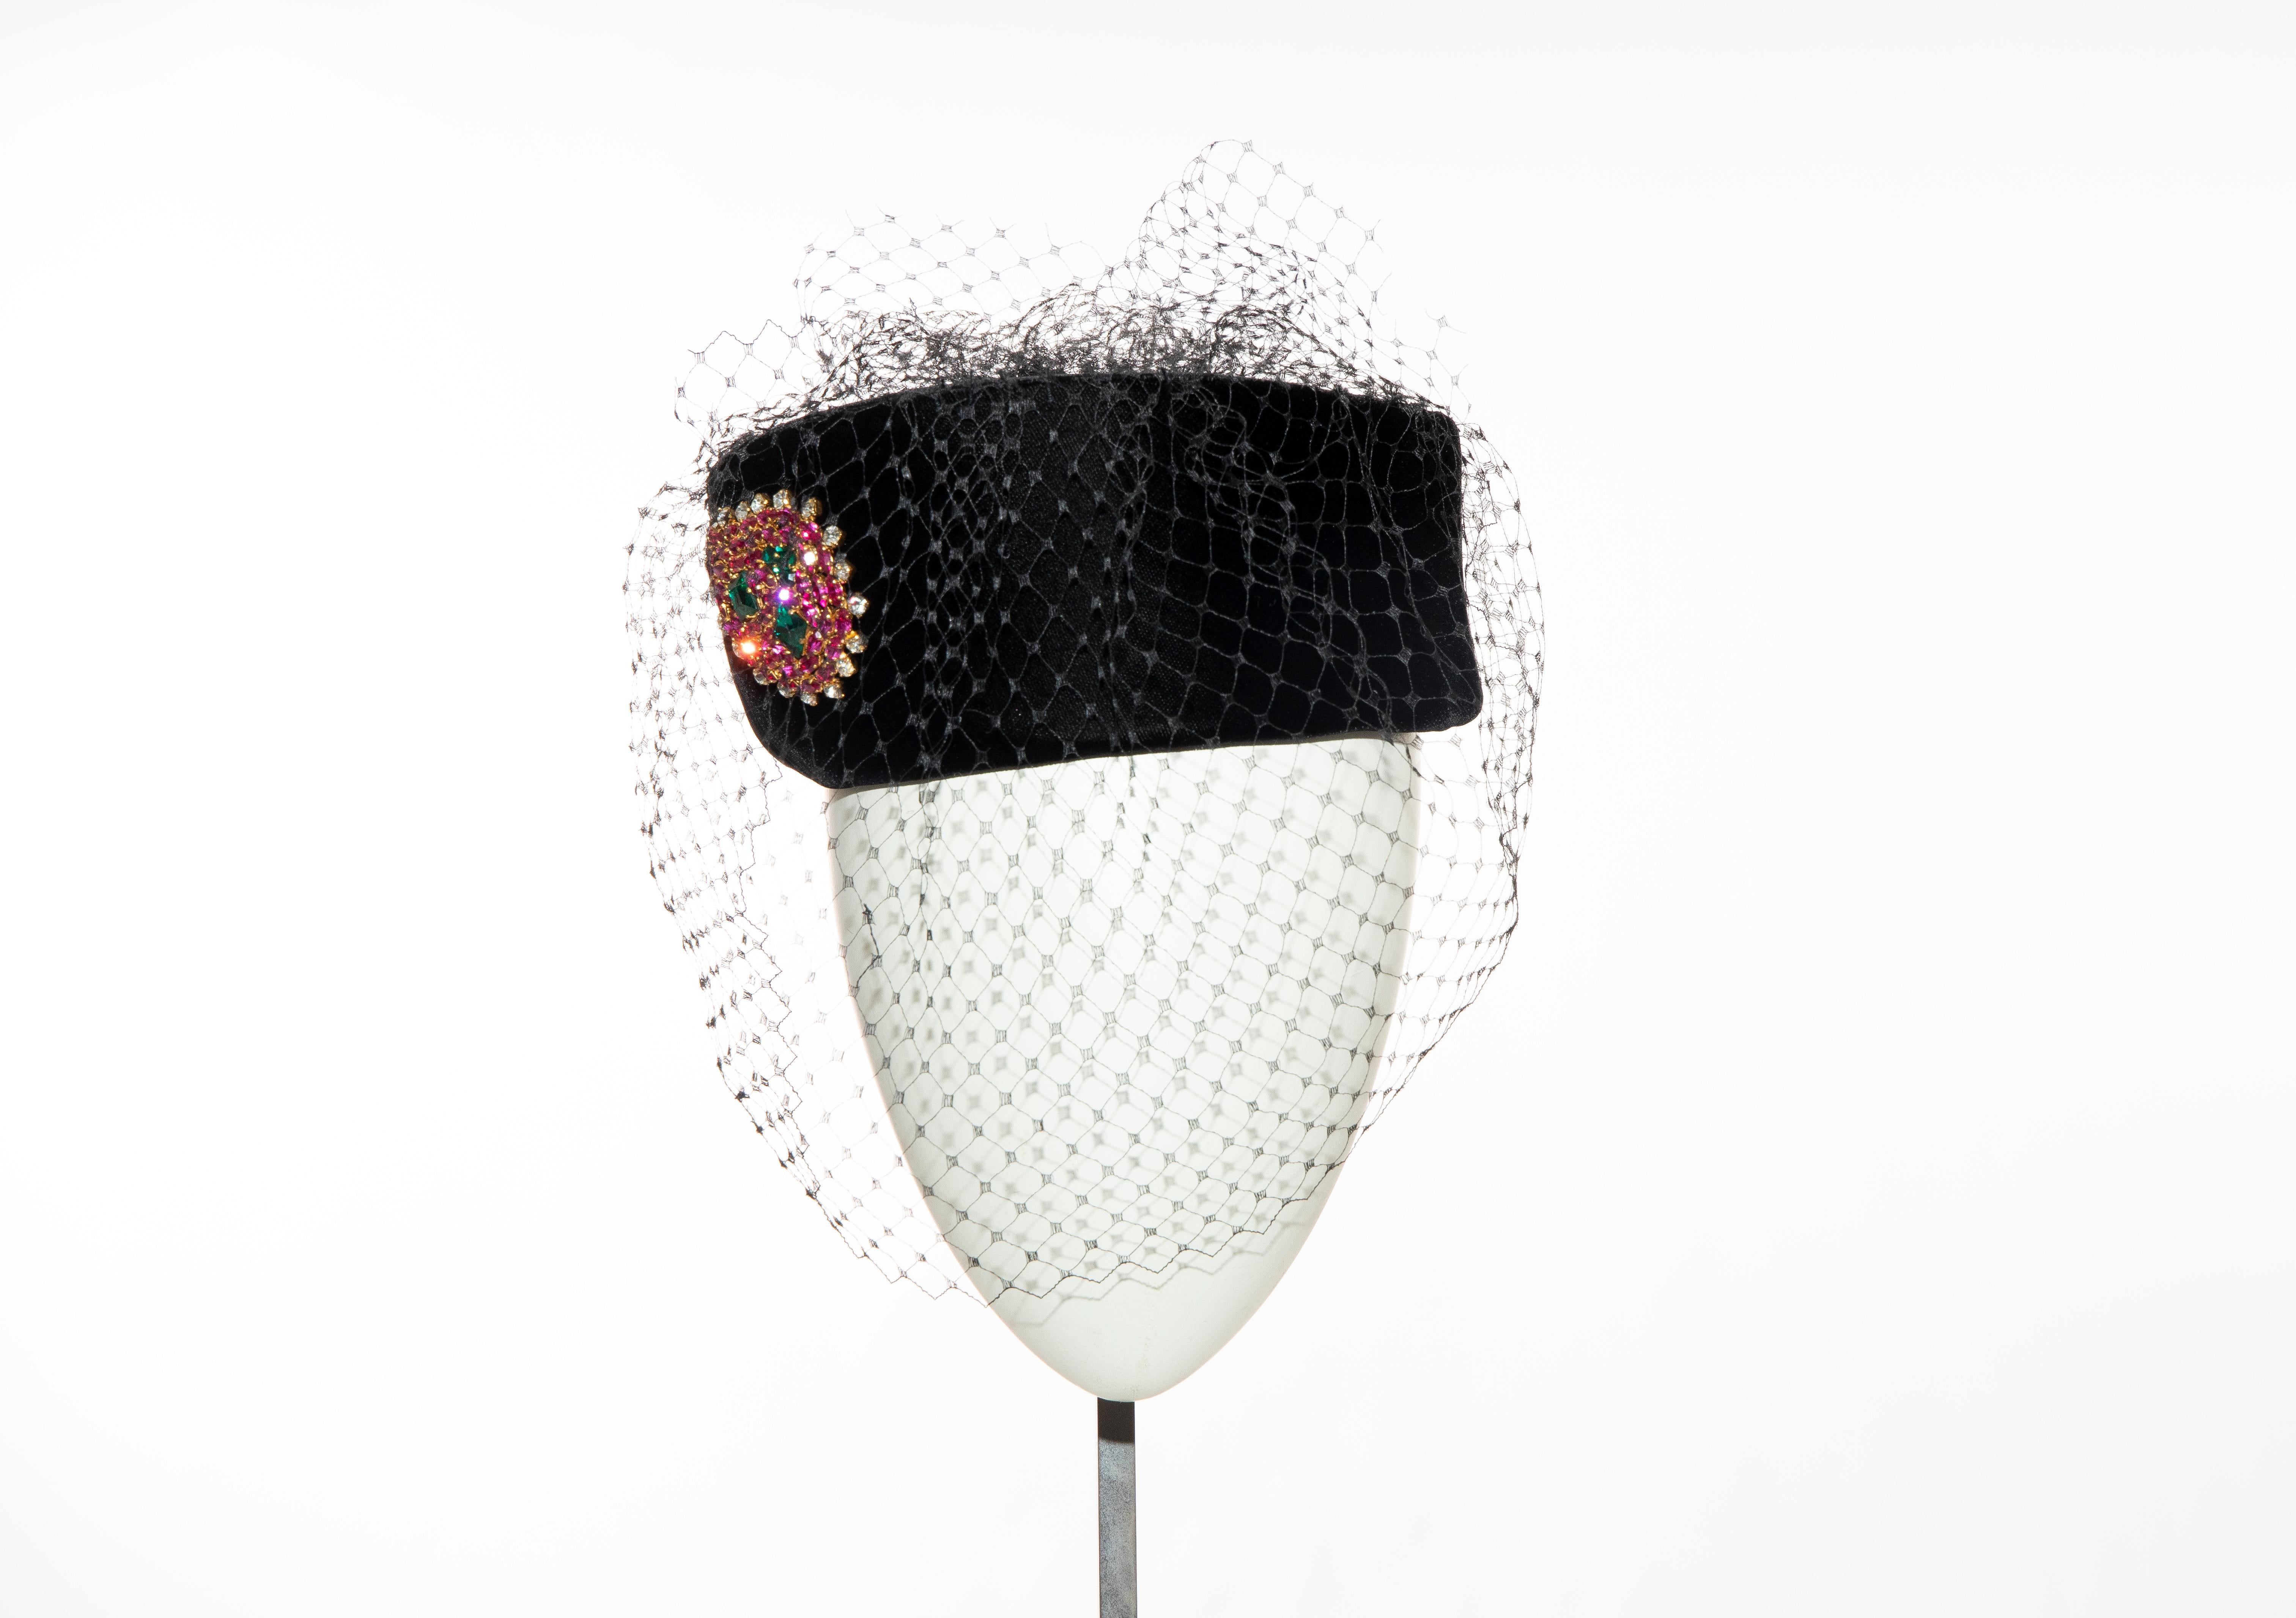 Givenchy, Circa: 1980's black velvet pill box hat with prong-set crystal brooch and black birdcage veil.

Comes with original Givenchy hat box.

Circumference: 24